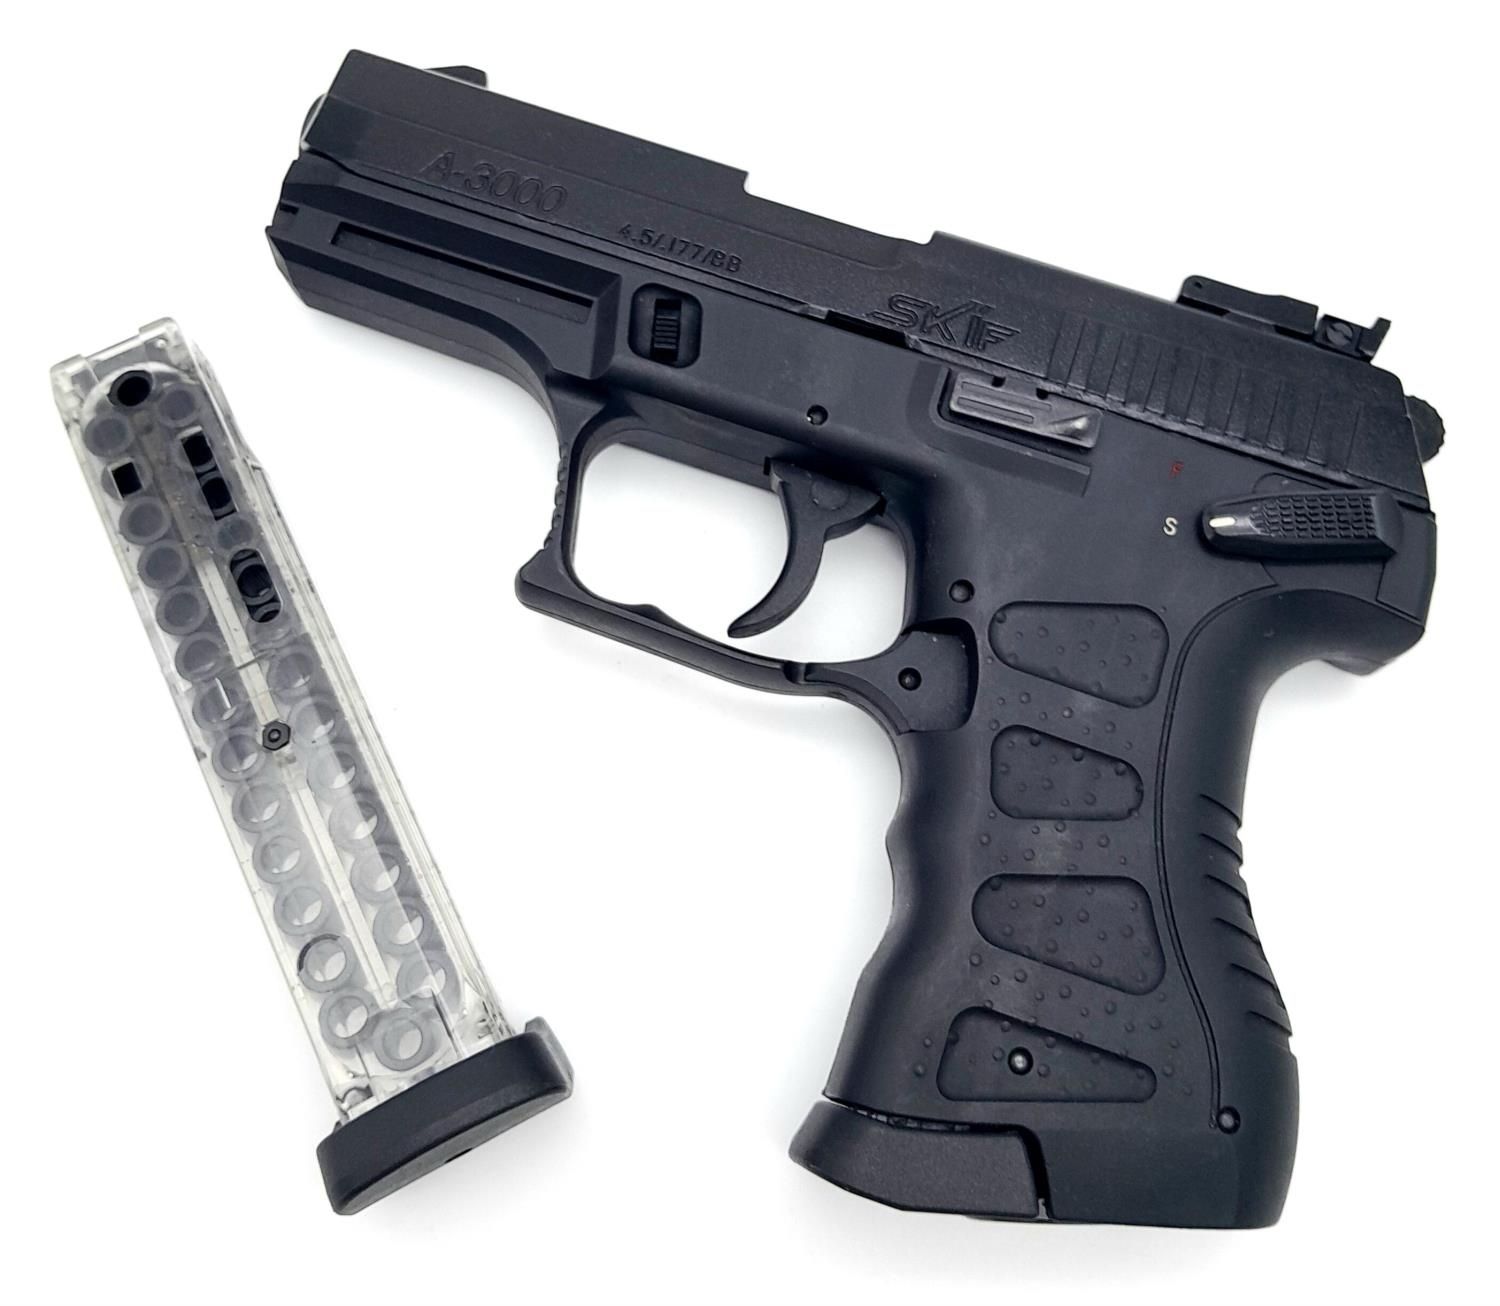 A Skif A-3000 C02 Air Pistol - .177 calibre. UK sales only. Over 18 Only. In fitted case.